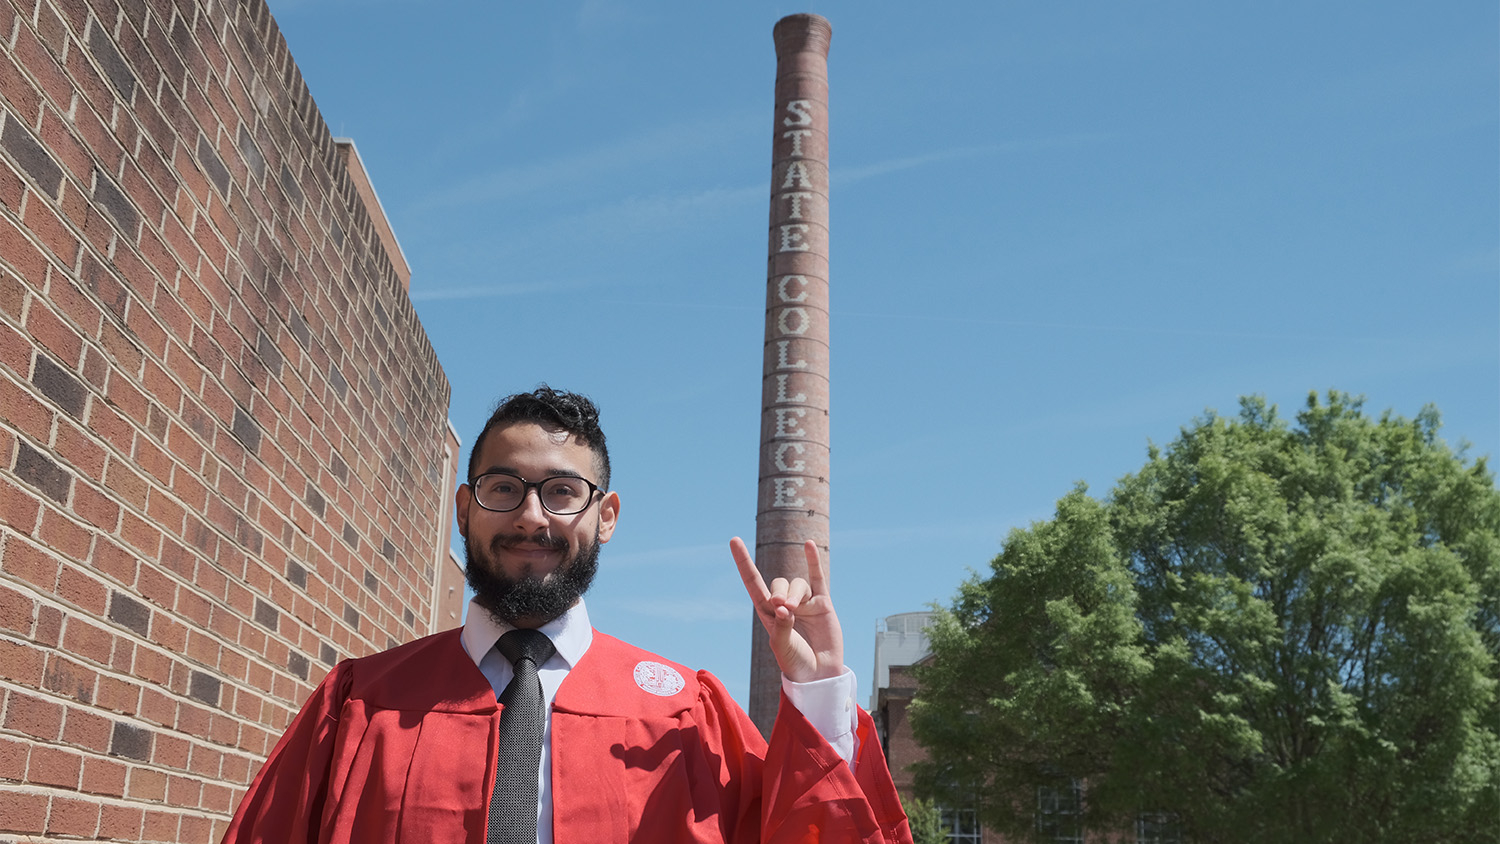 Arnulfo Silva wearing red graduation robes and making a wolfie sign with his hand in front of the smoke stack that says "State College."